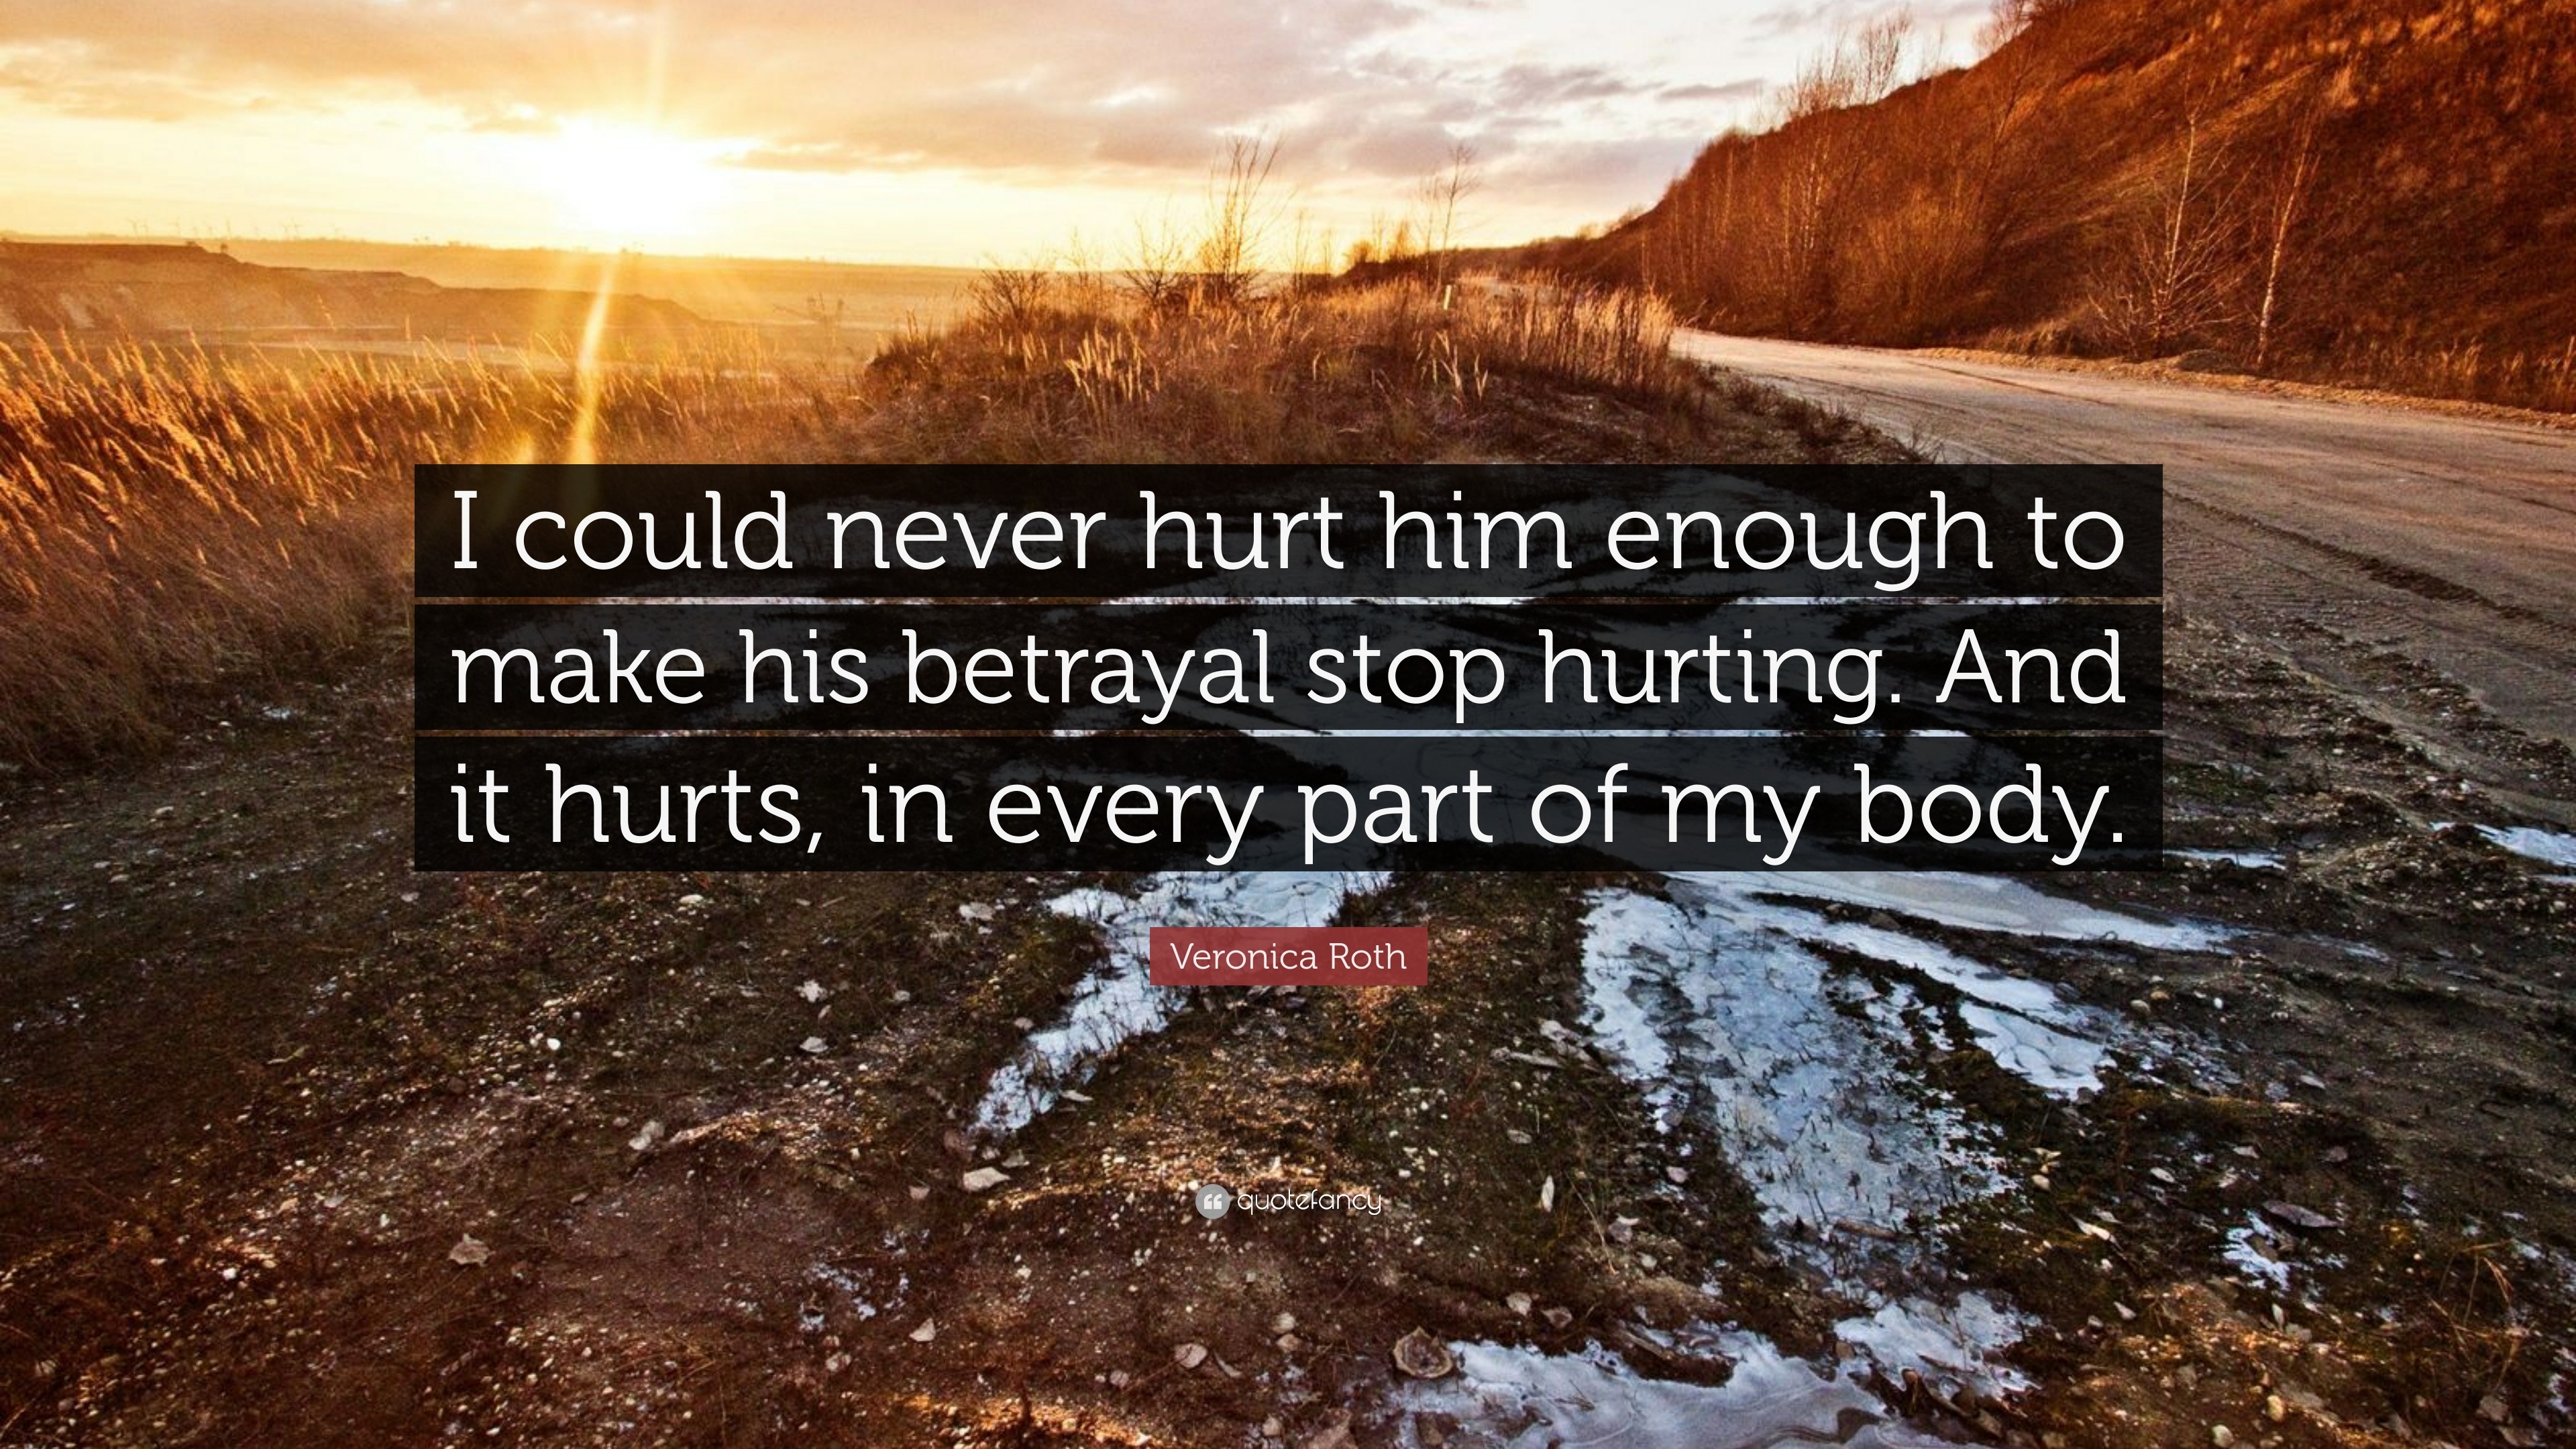 Veronica Roth Quote “I could never hurt him enough to make his betrayal stop